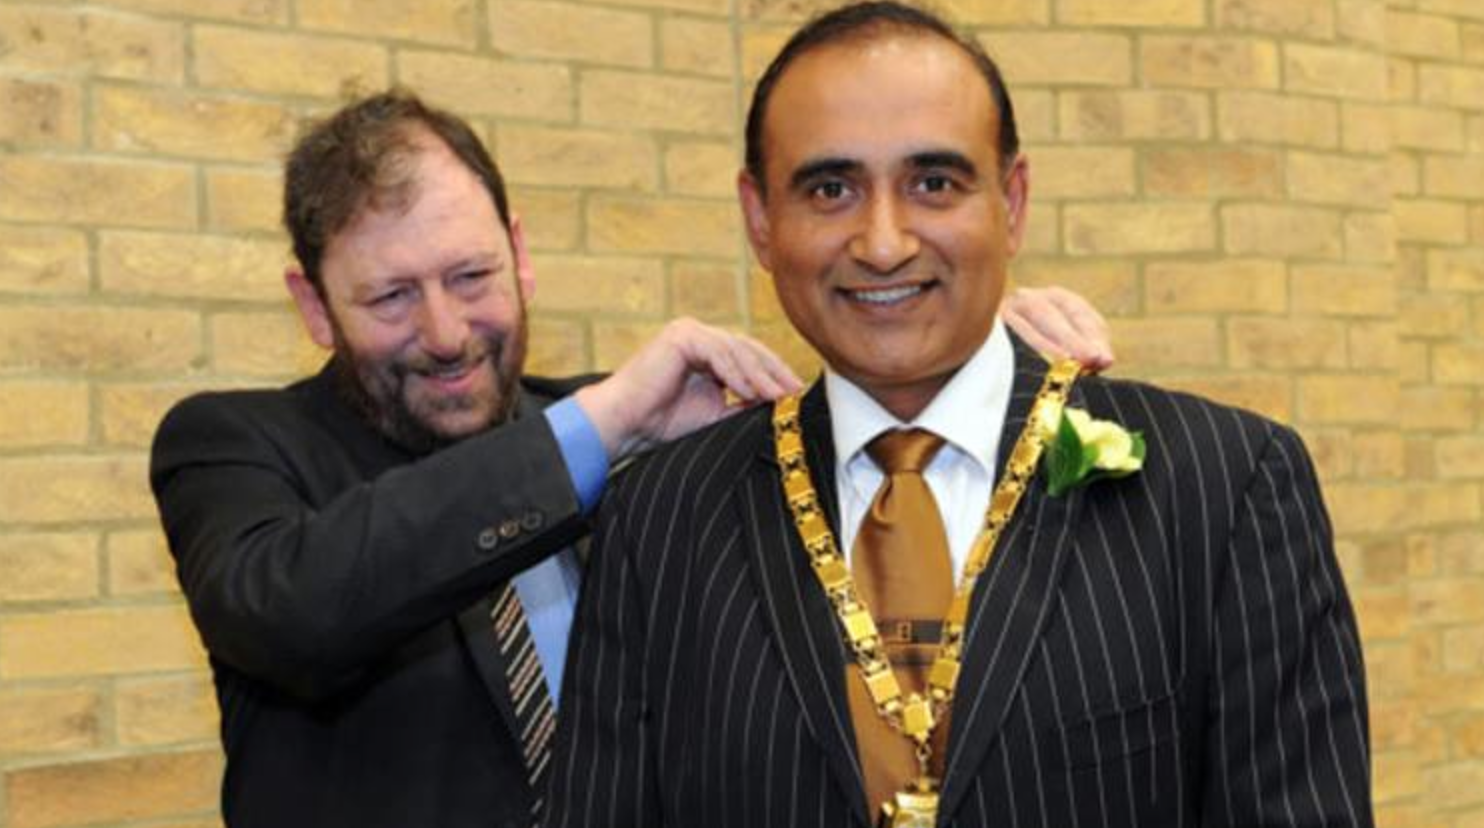 Milton Keynes Mayor Resigns After Vouching for Rapist for Taxi Licence Application